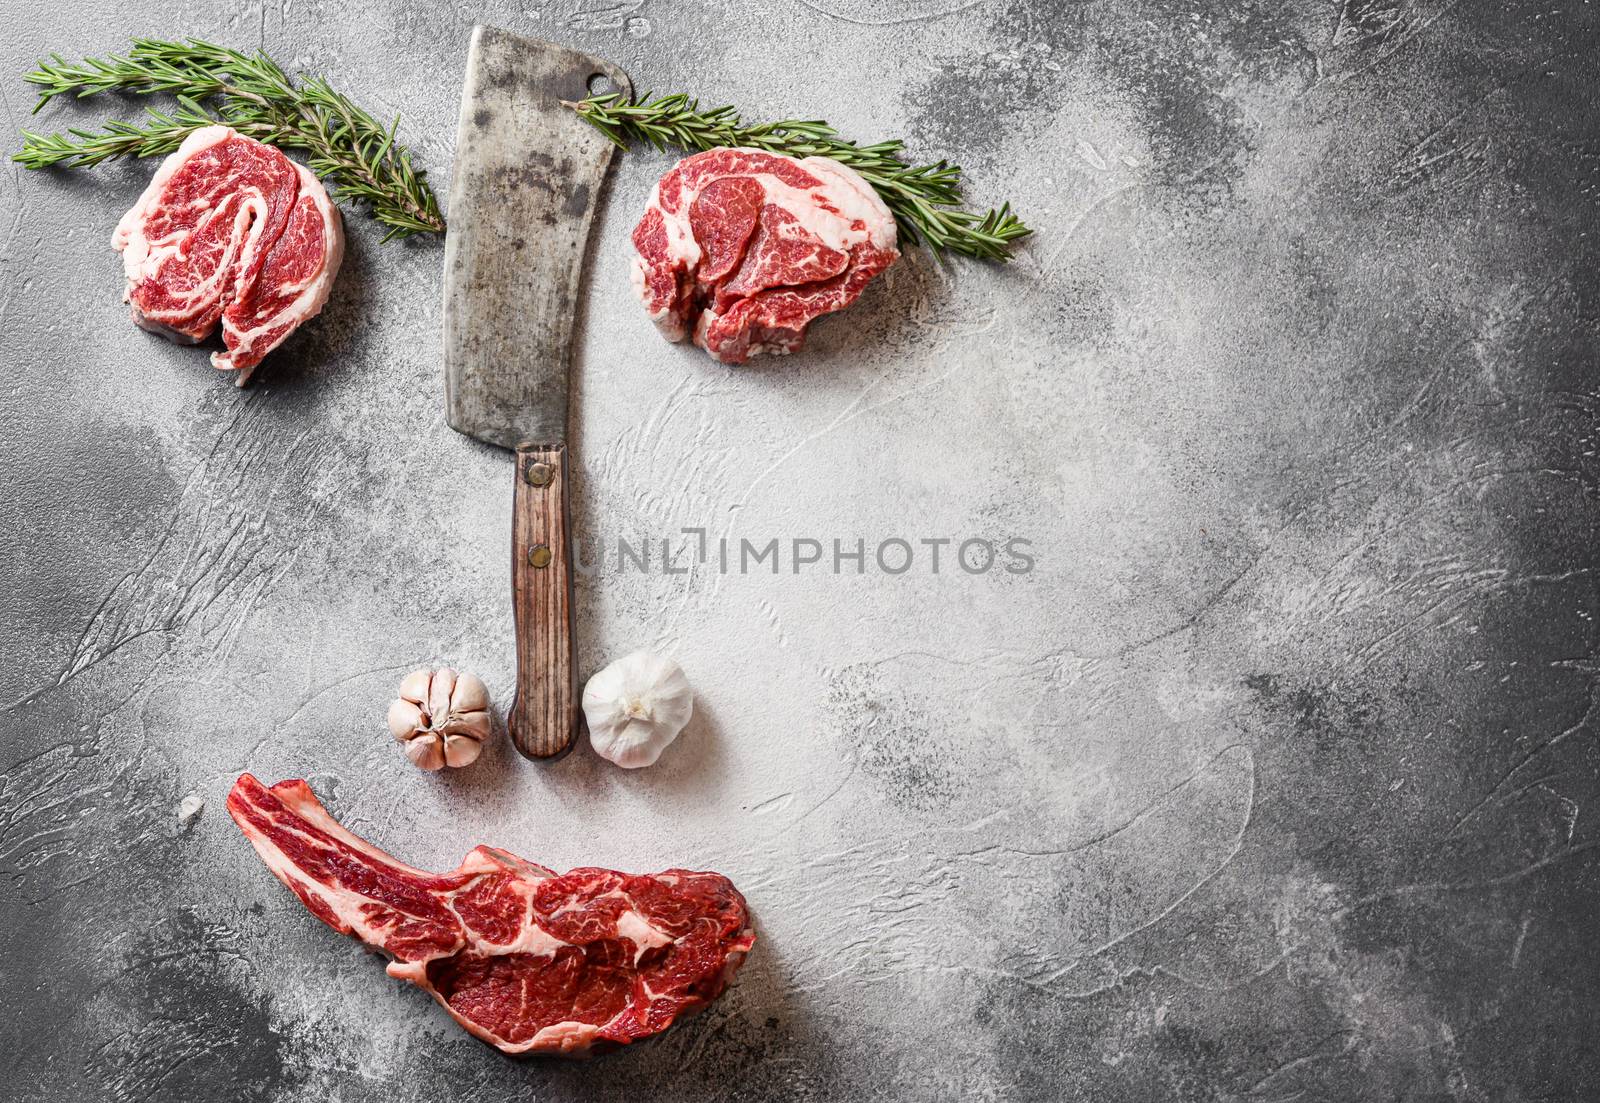 Various beef Cowboy steak happy face art style emotion with space for text. or Ribeye Steak, BoneIn, with chuck eye roll cut with the meat american cleaver knife over grey stone table slate cutting top view sad face styled art with seasonings, tomatoes, garlic, rosemary/